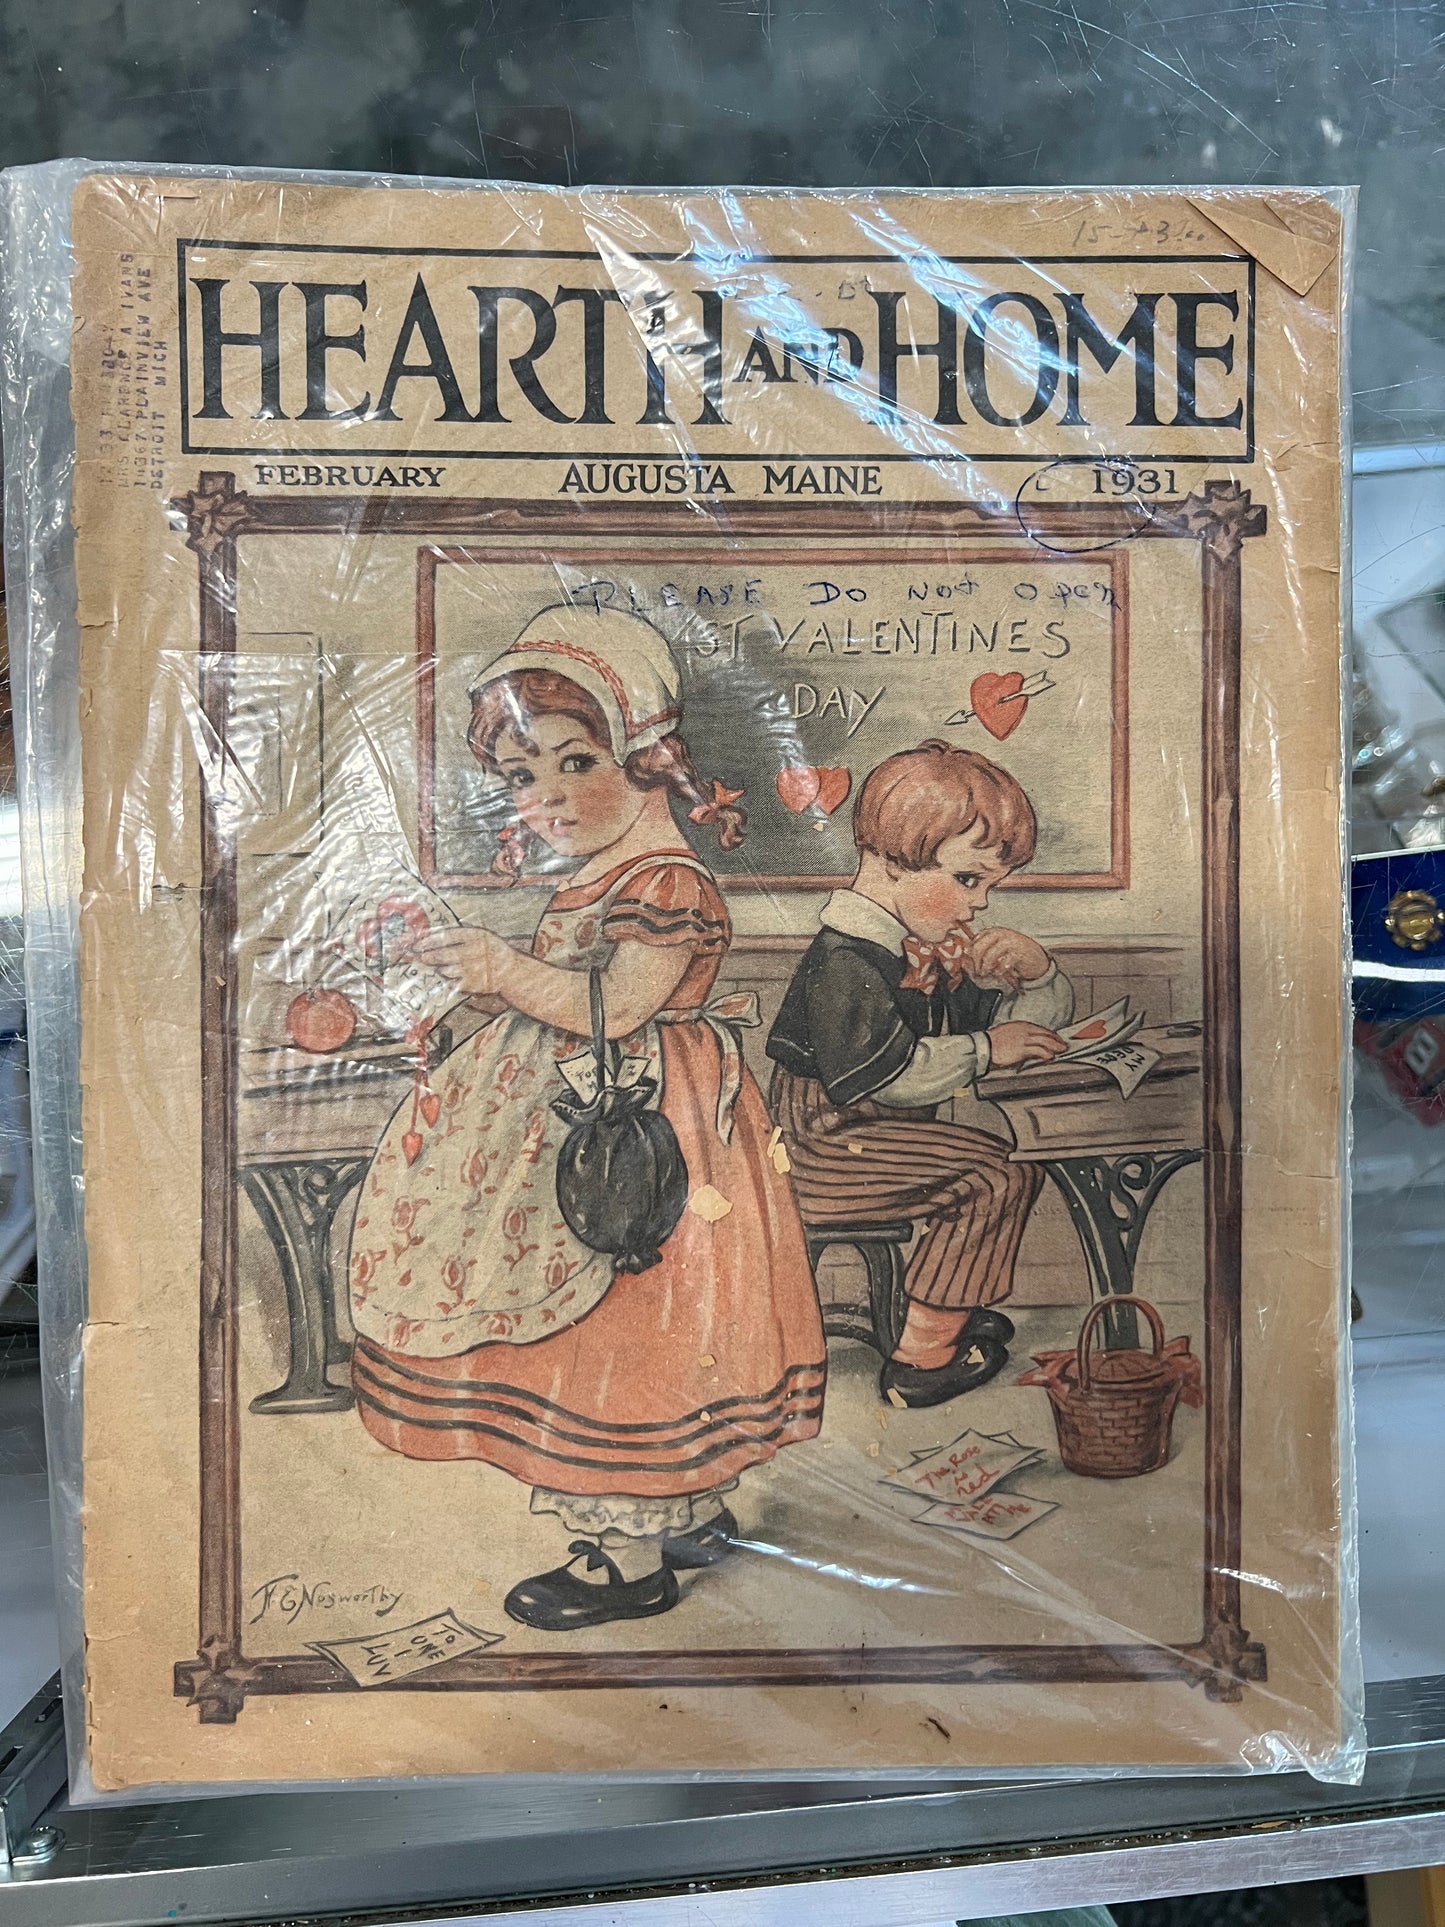 Hearth and Home February 1931 Augusta Maine